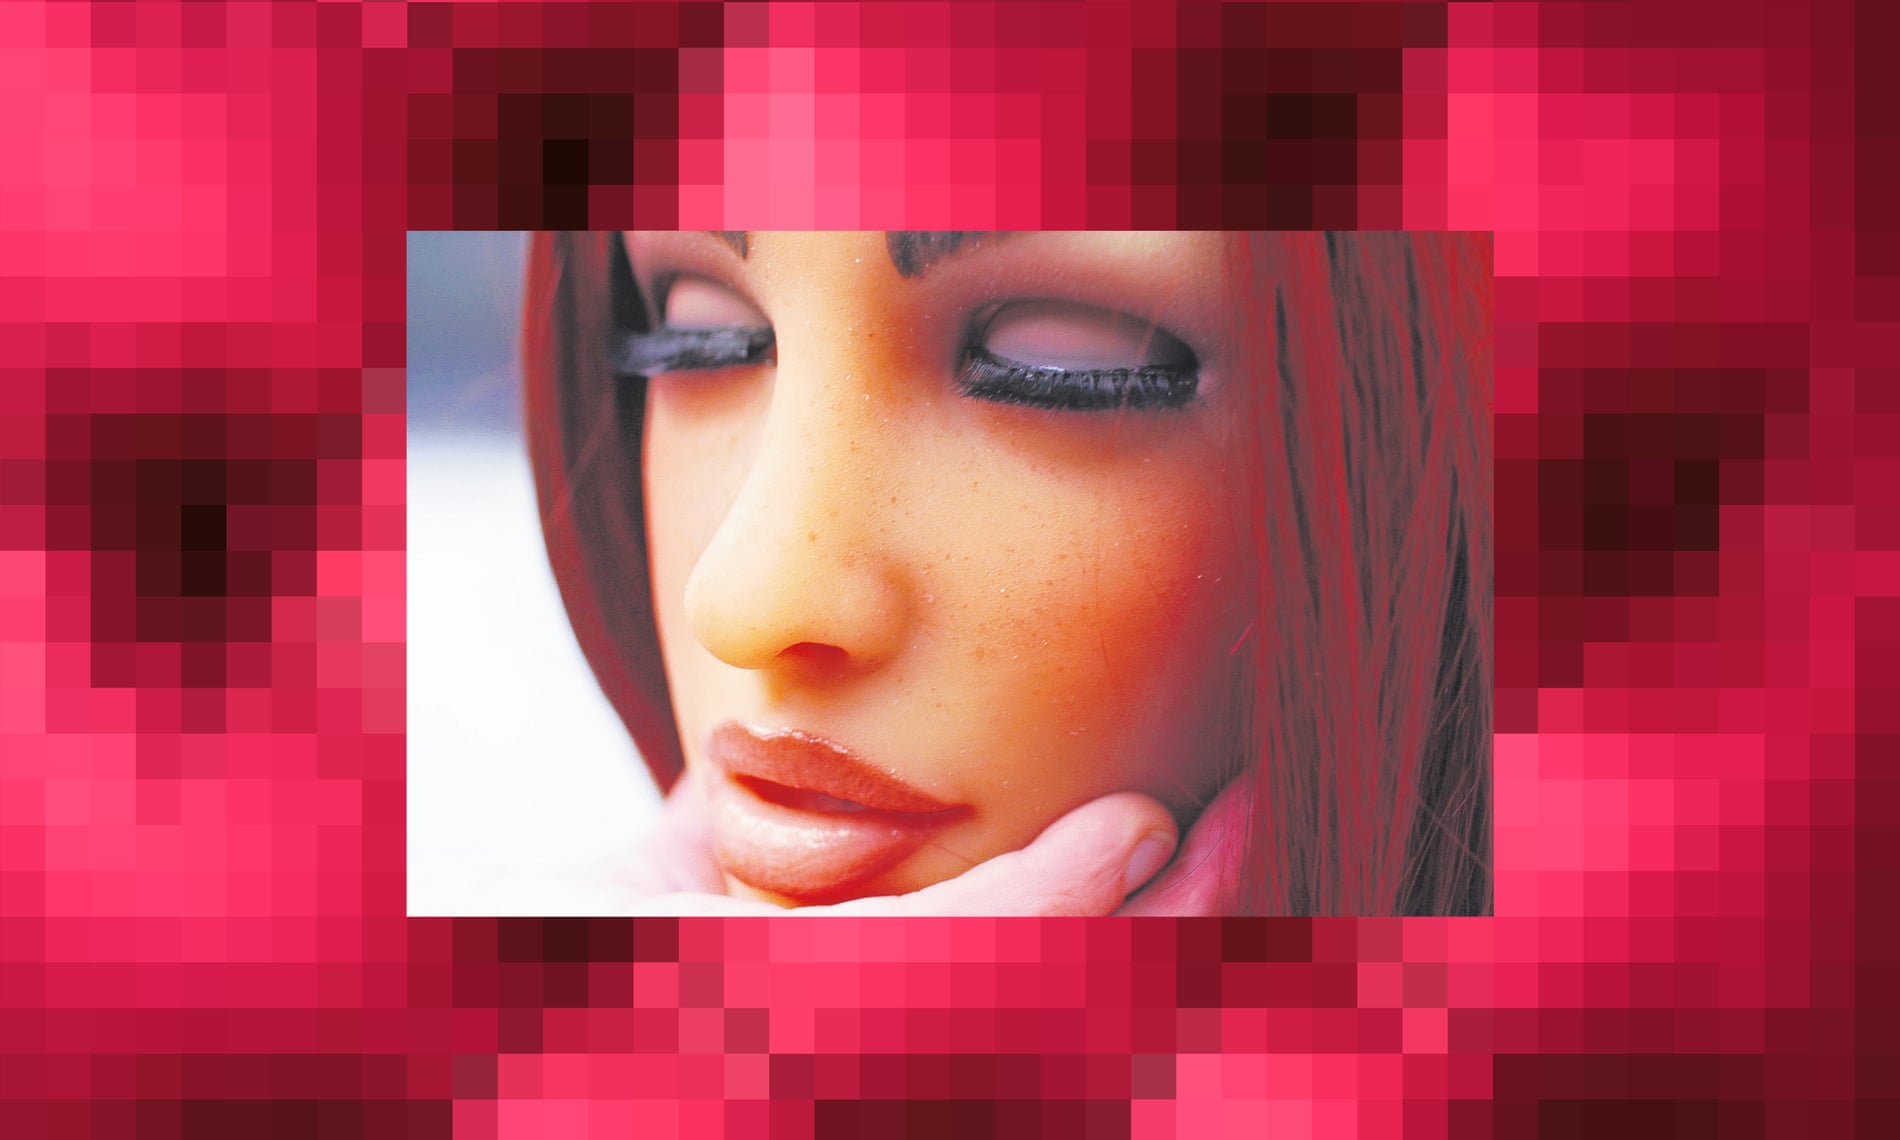 a Sex Robot against an abstract pixellated background